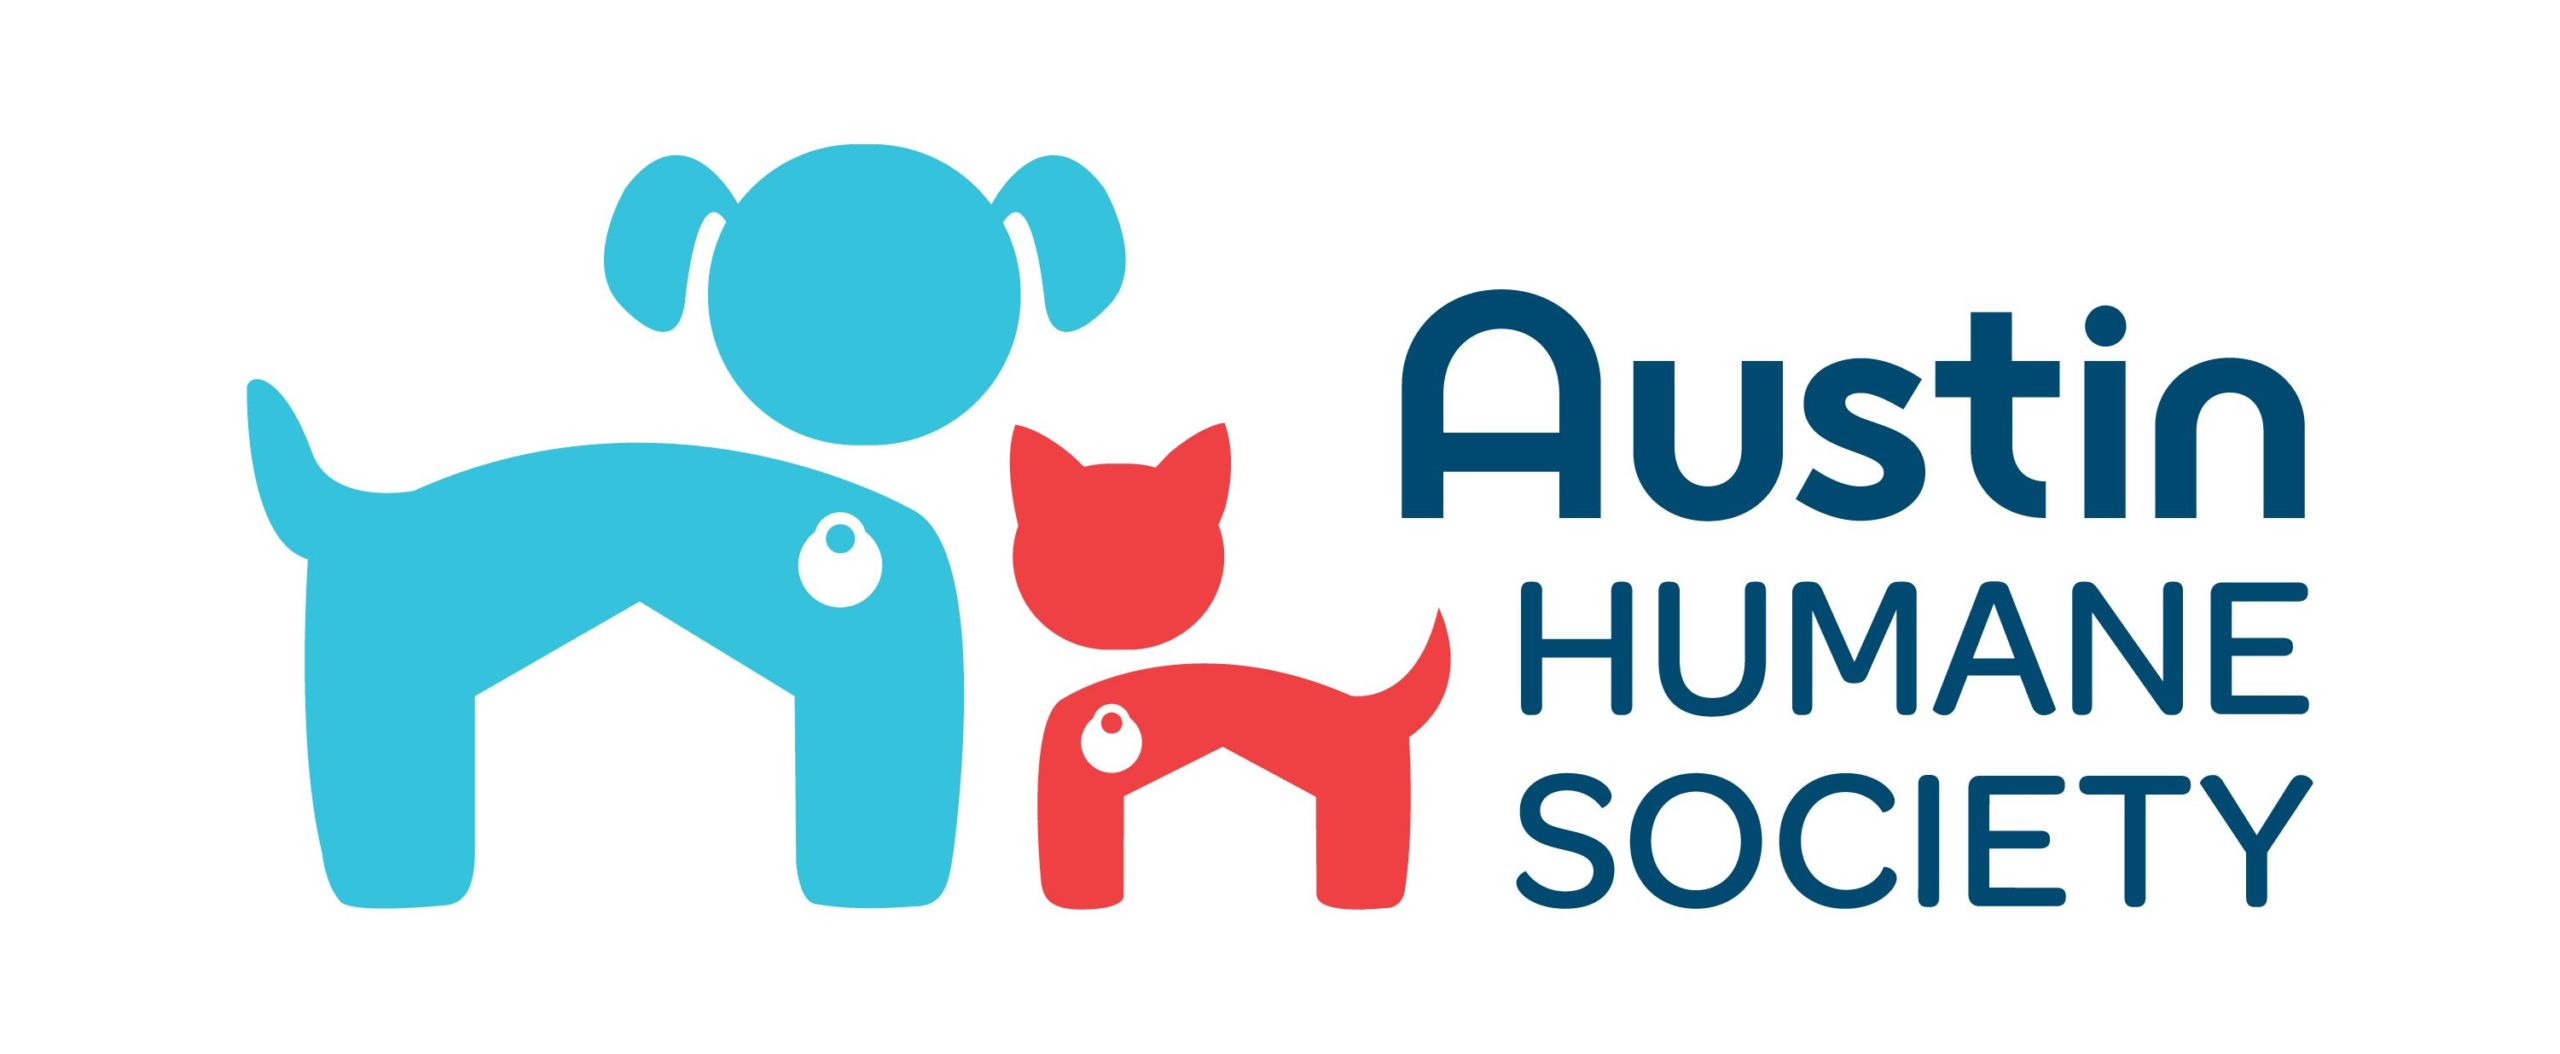 Humane society in austin texas amerigroup over the